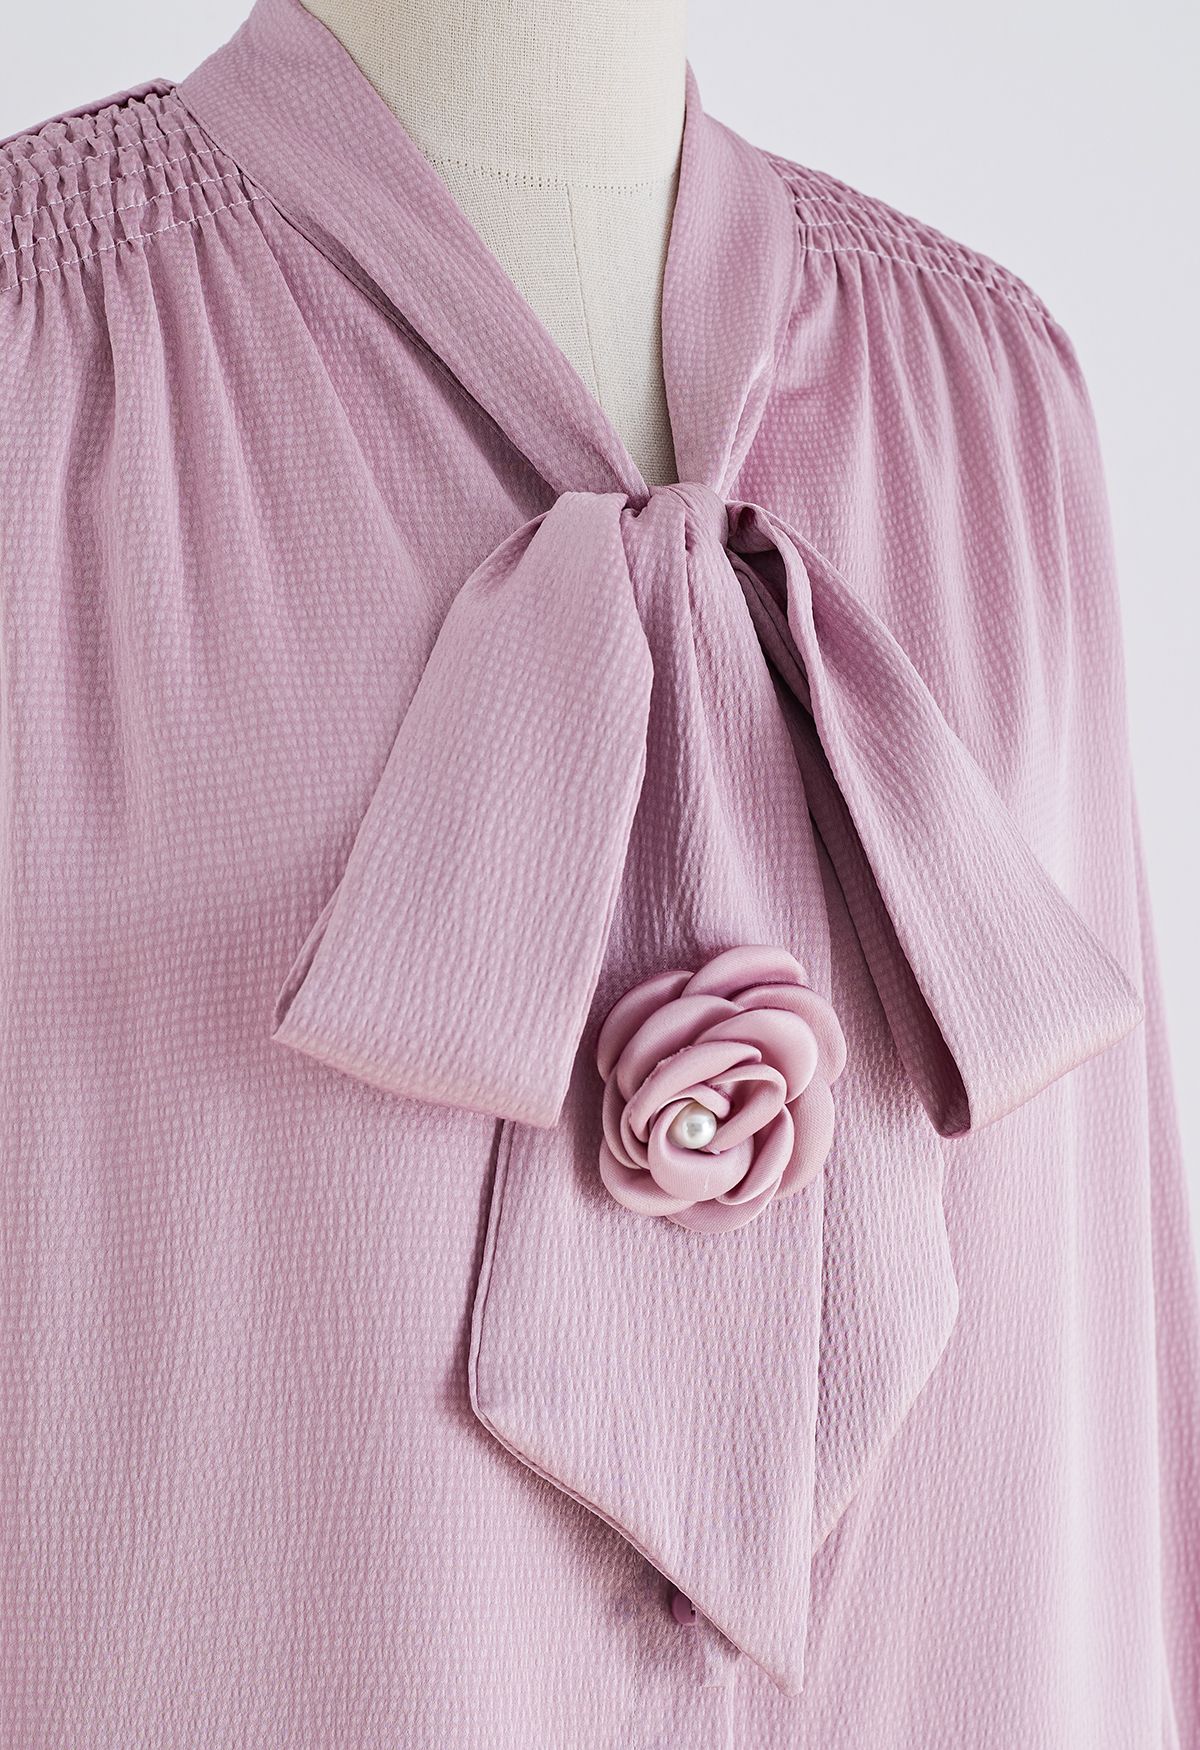 Rose Bowknot Embossed Shirt in Pink